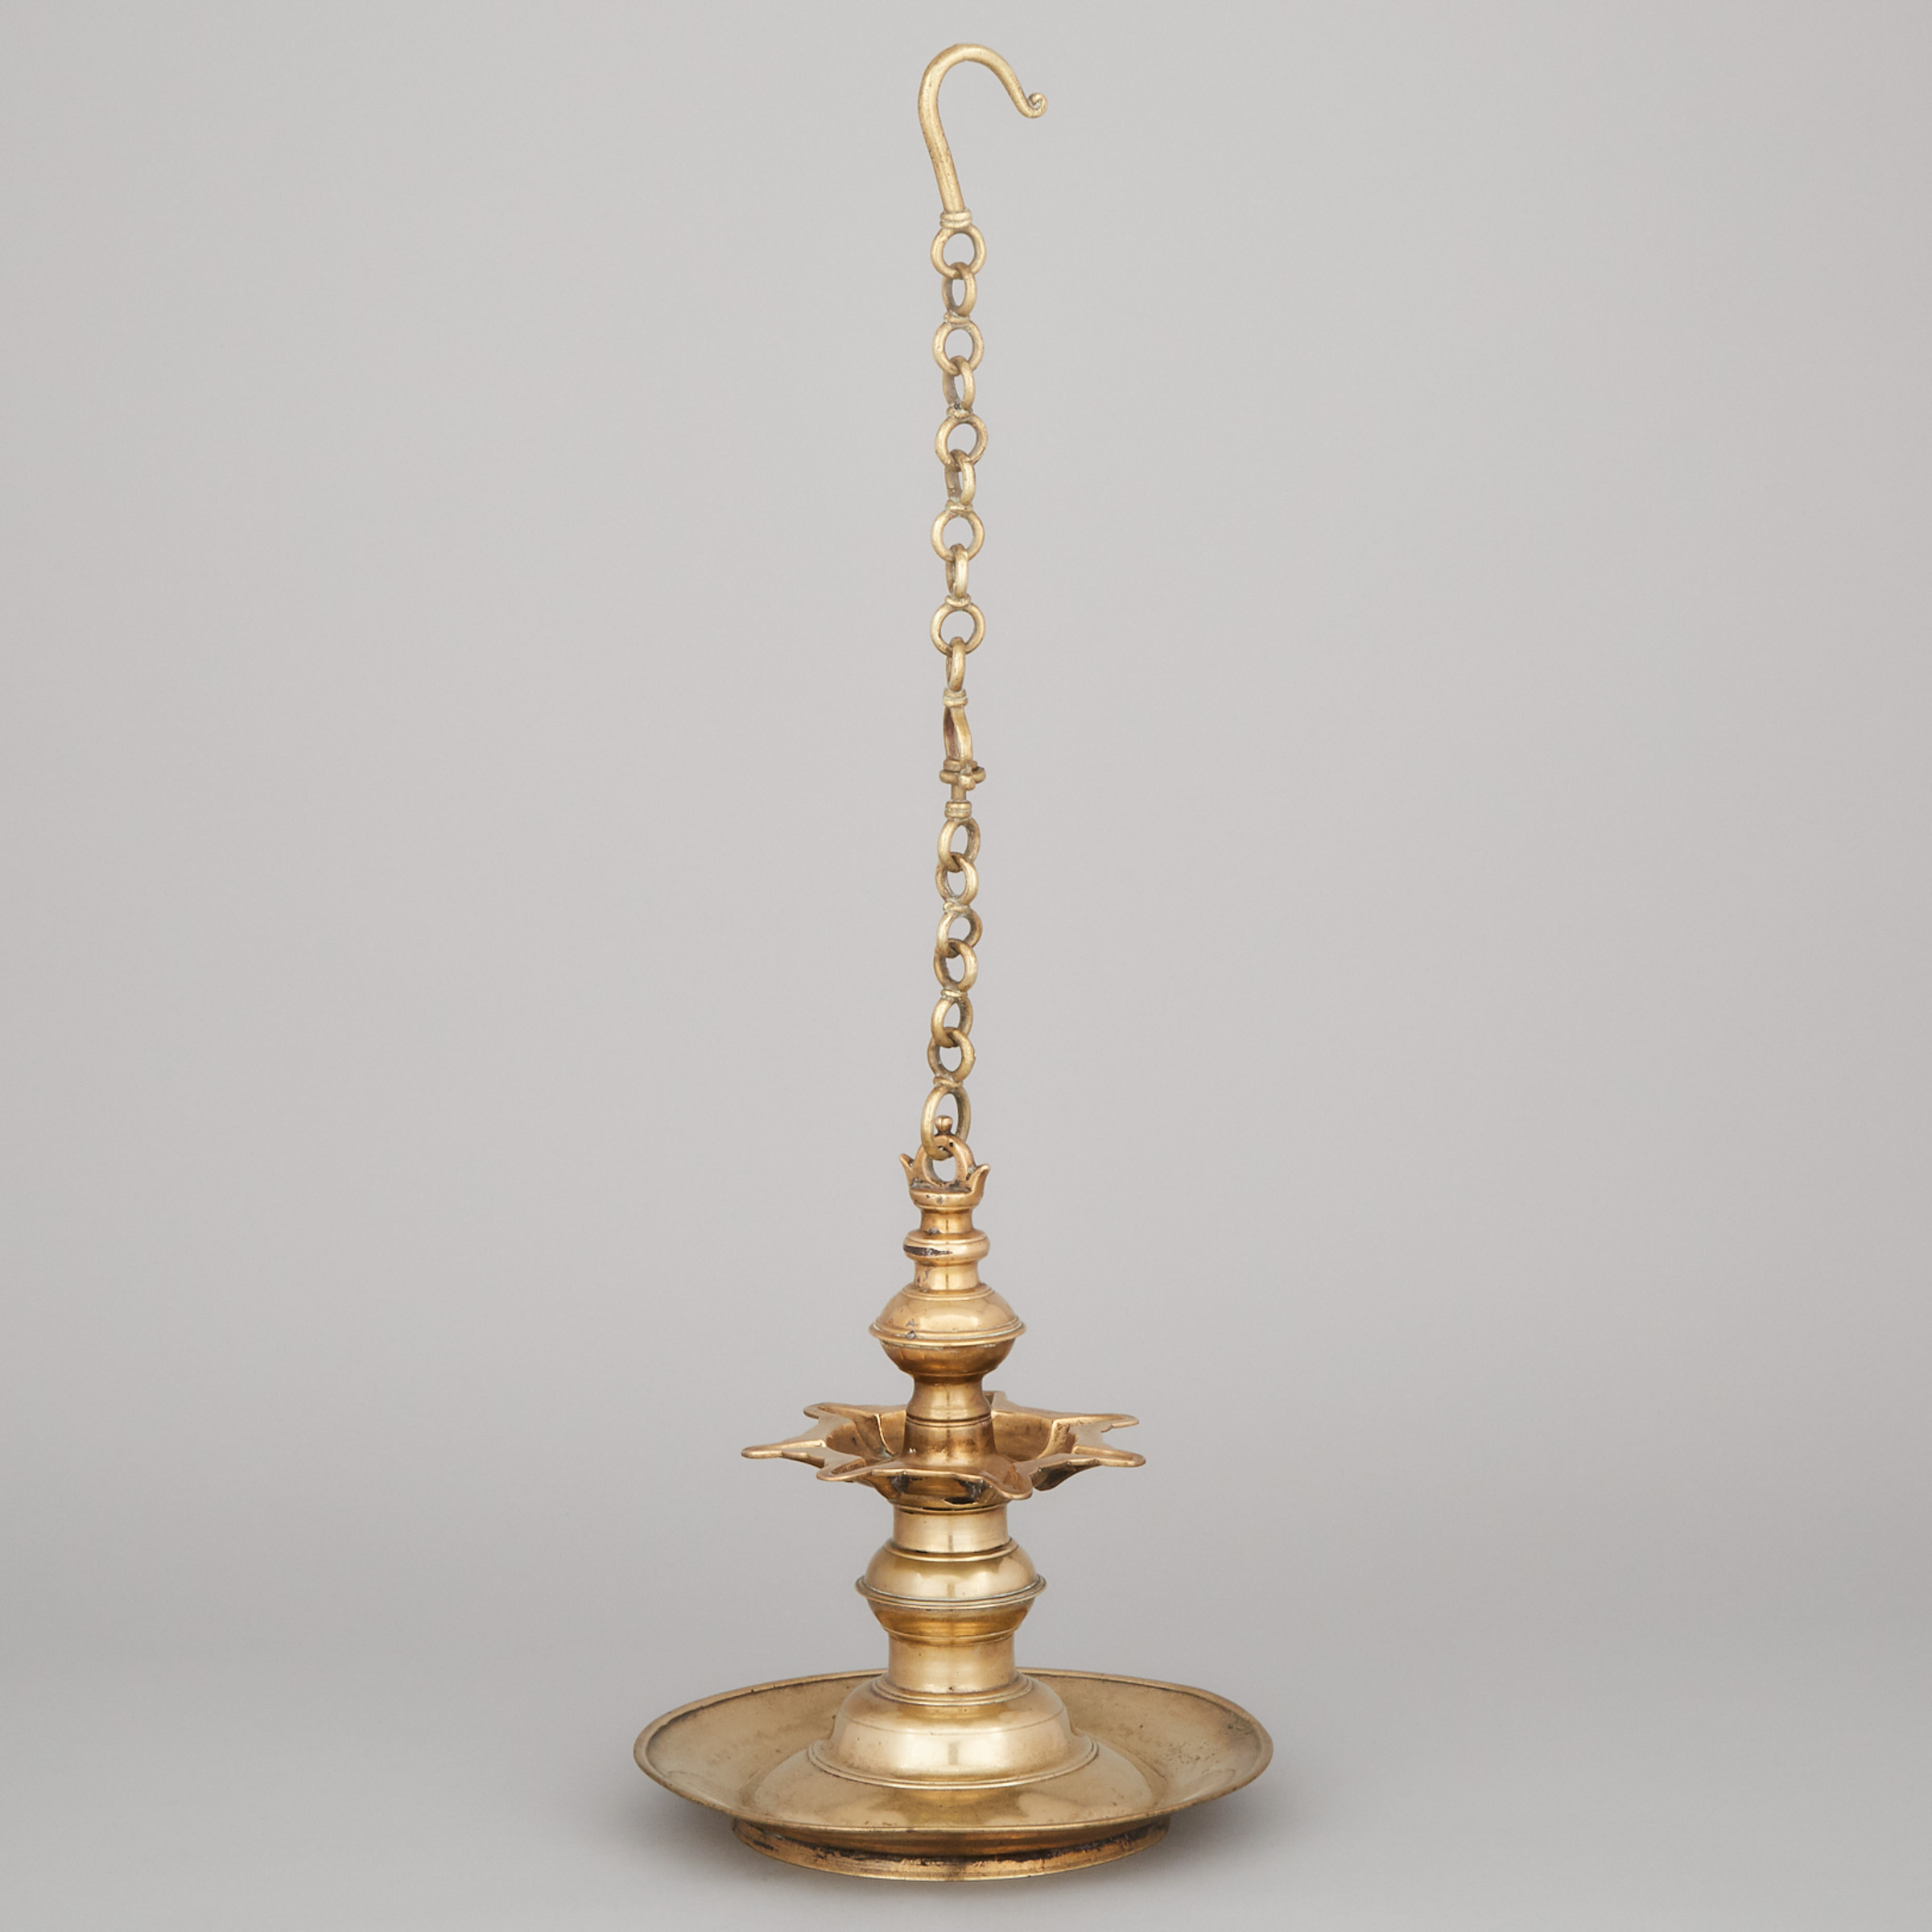 South Indian Bronze Thookkuvilakku Hanging Oil Lamp, 19th century or earlier